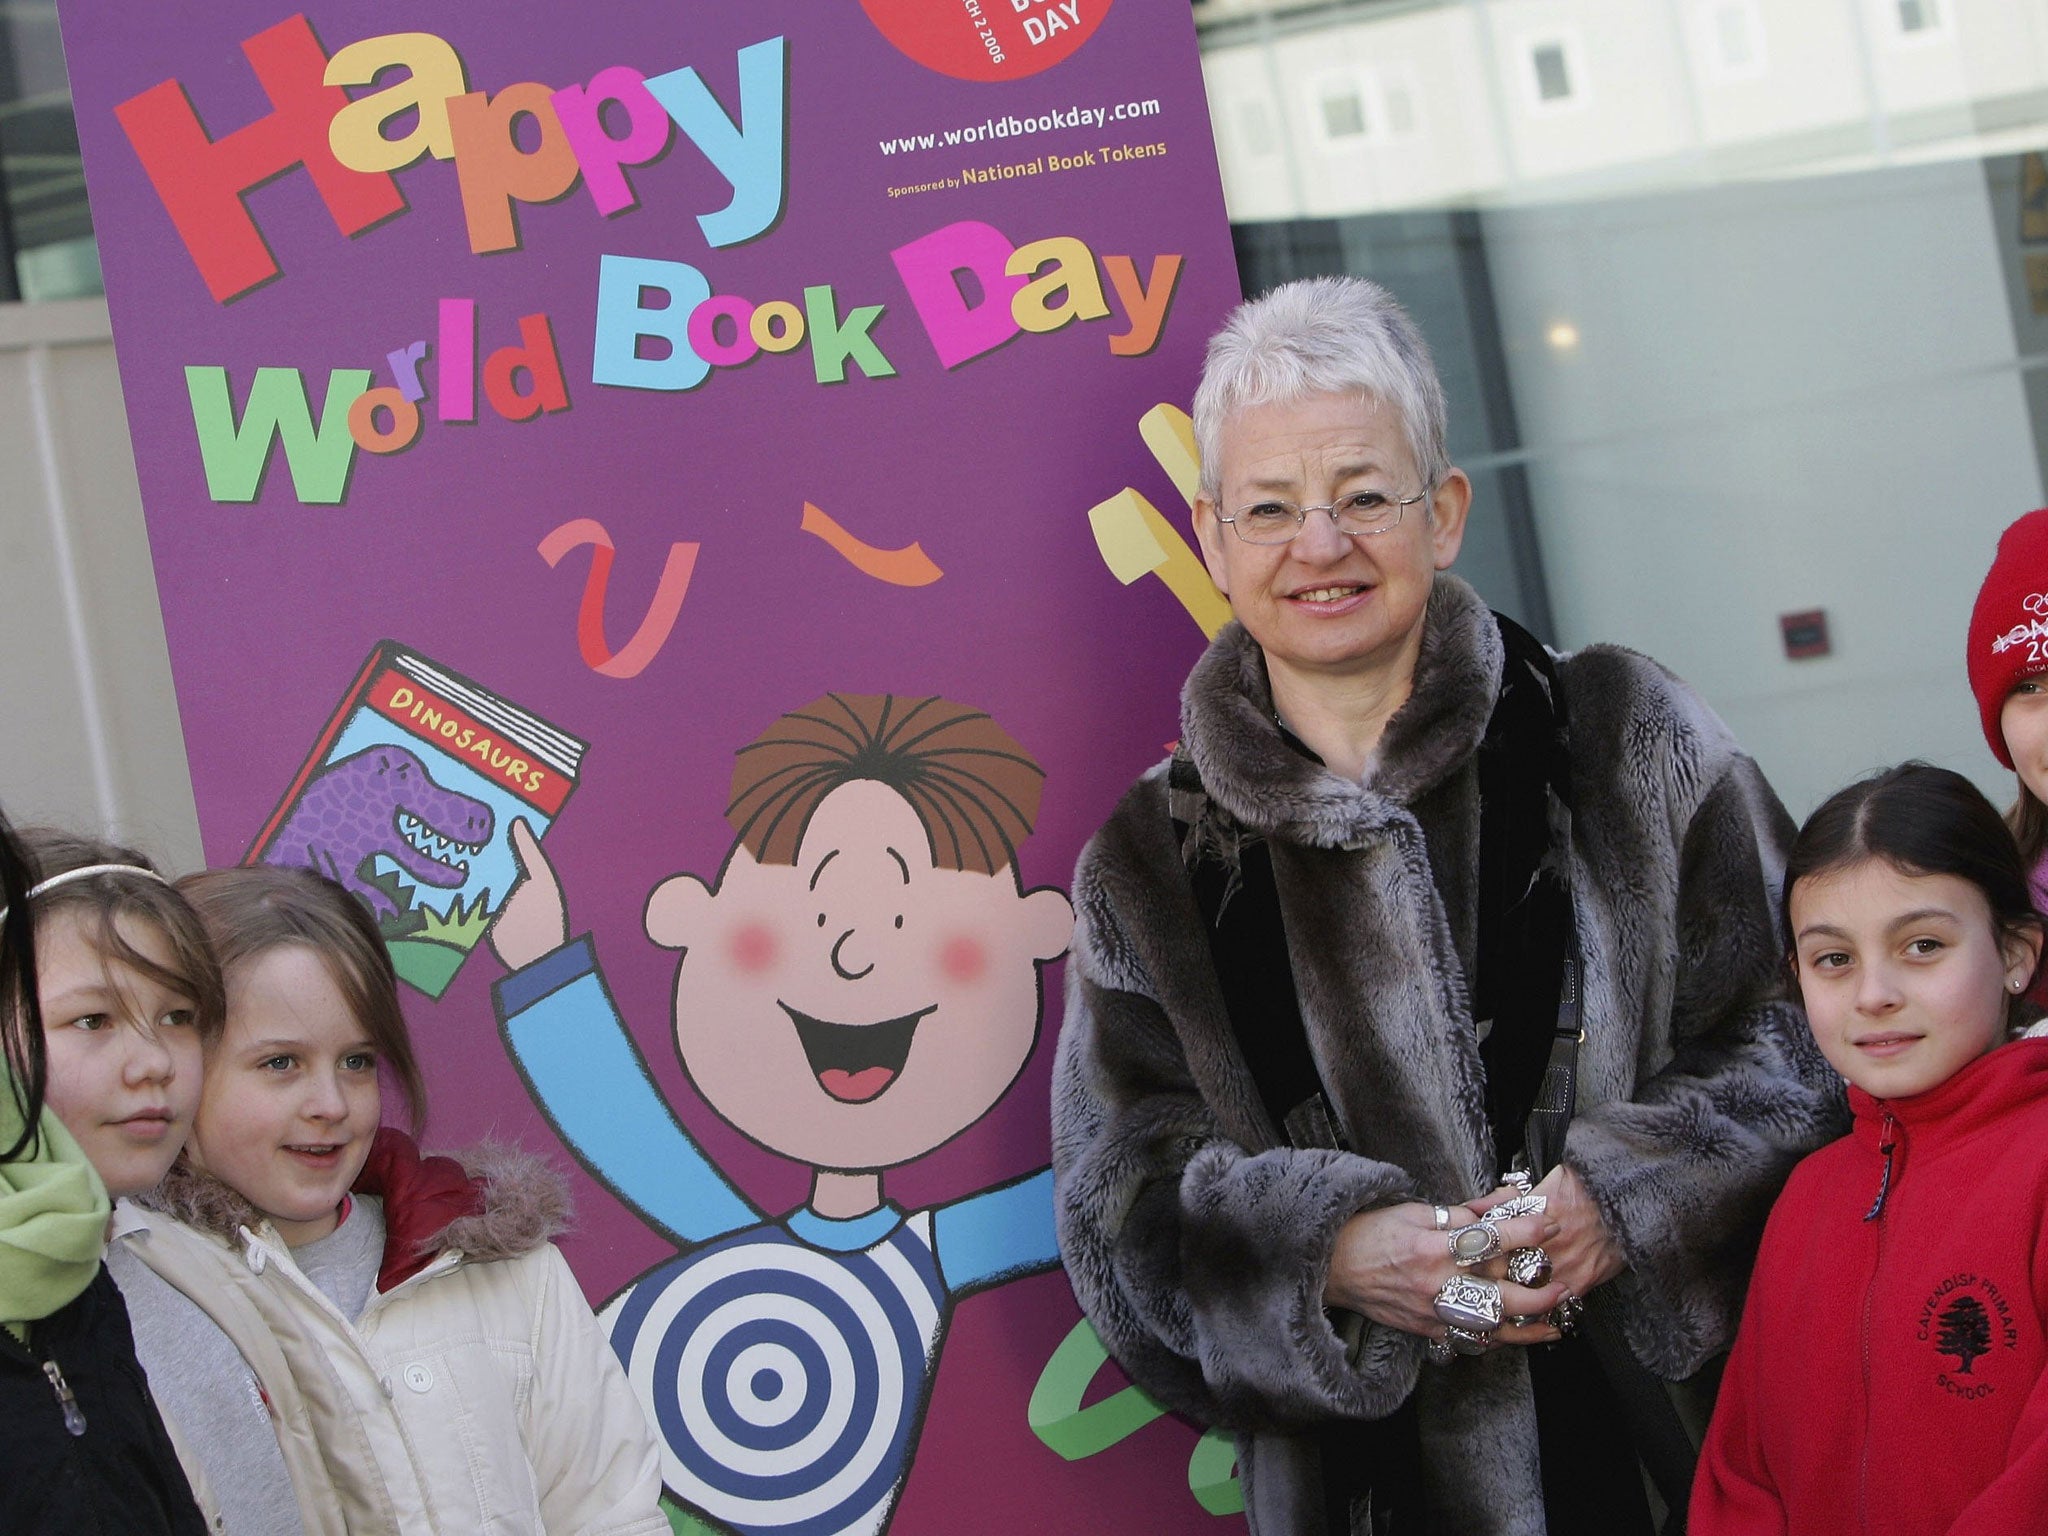 Jacqueline Wilson said most children can not spell her name correctly